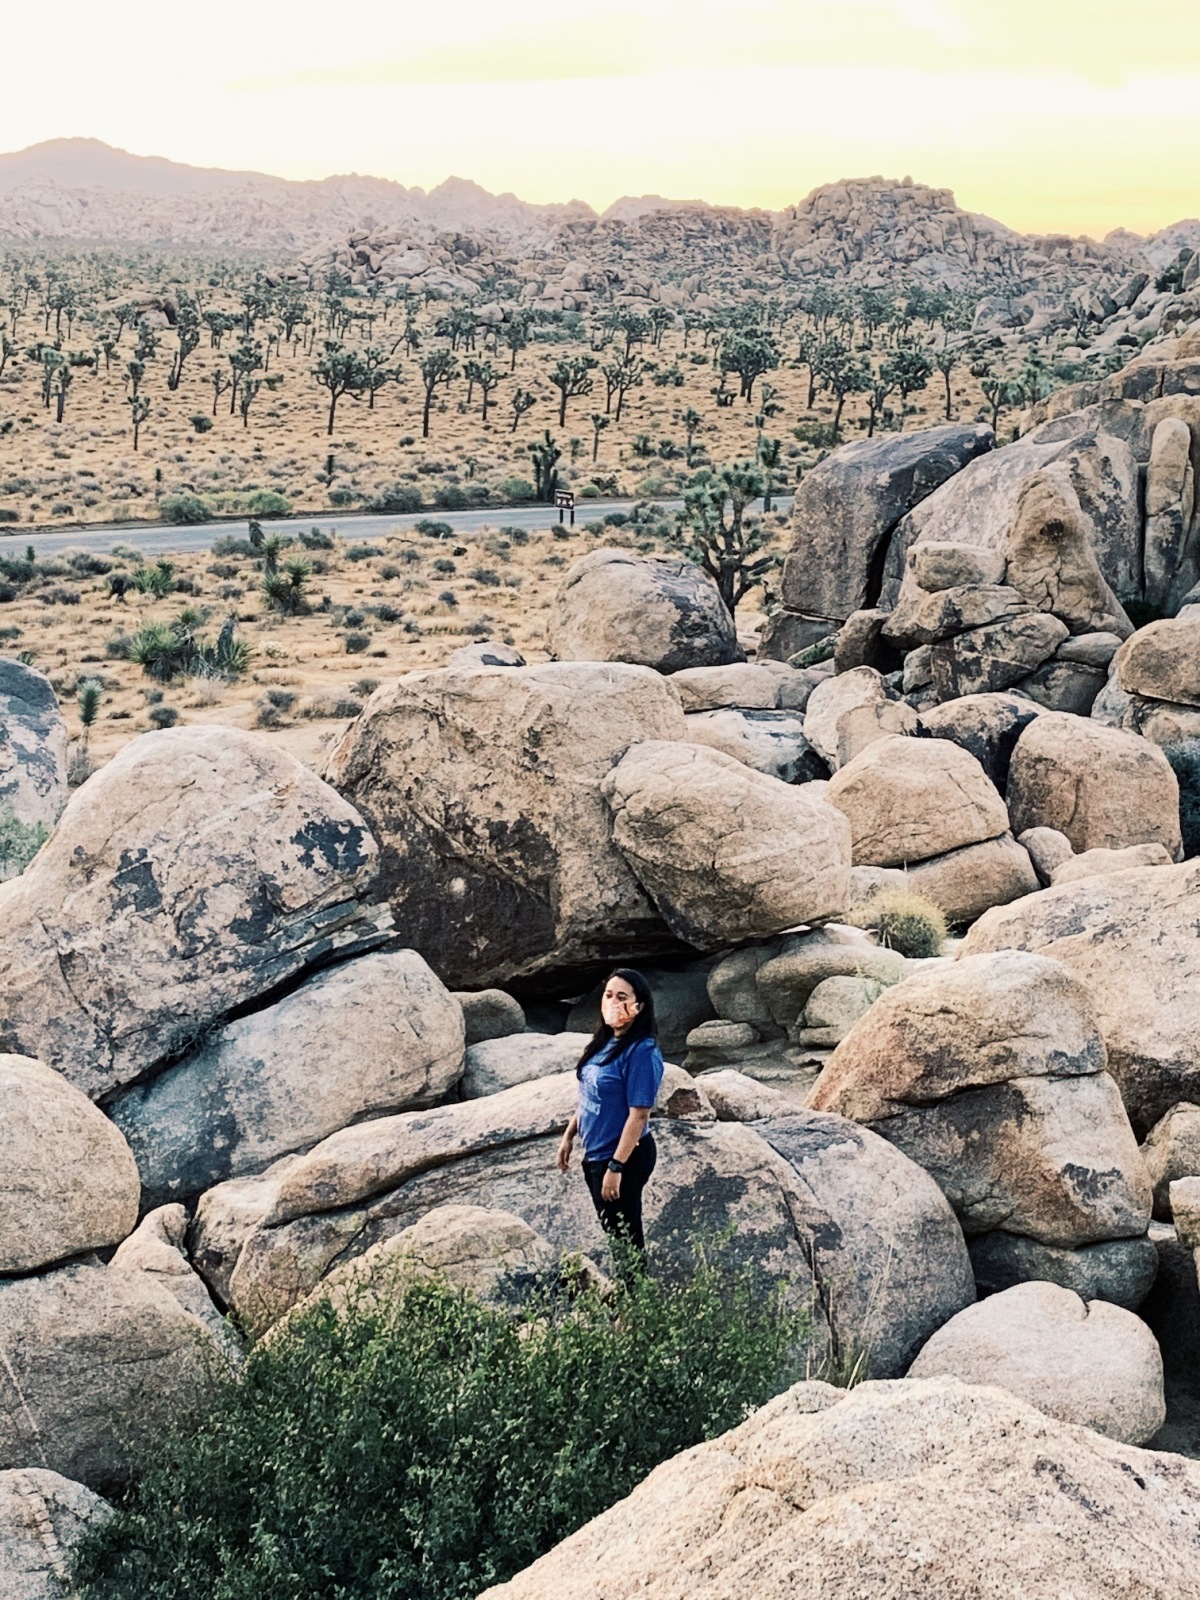 That Time We Visited Joshua Tree National Park During The Pandemic